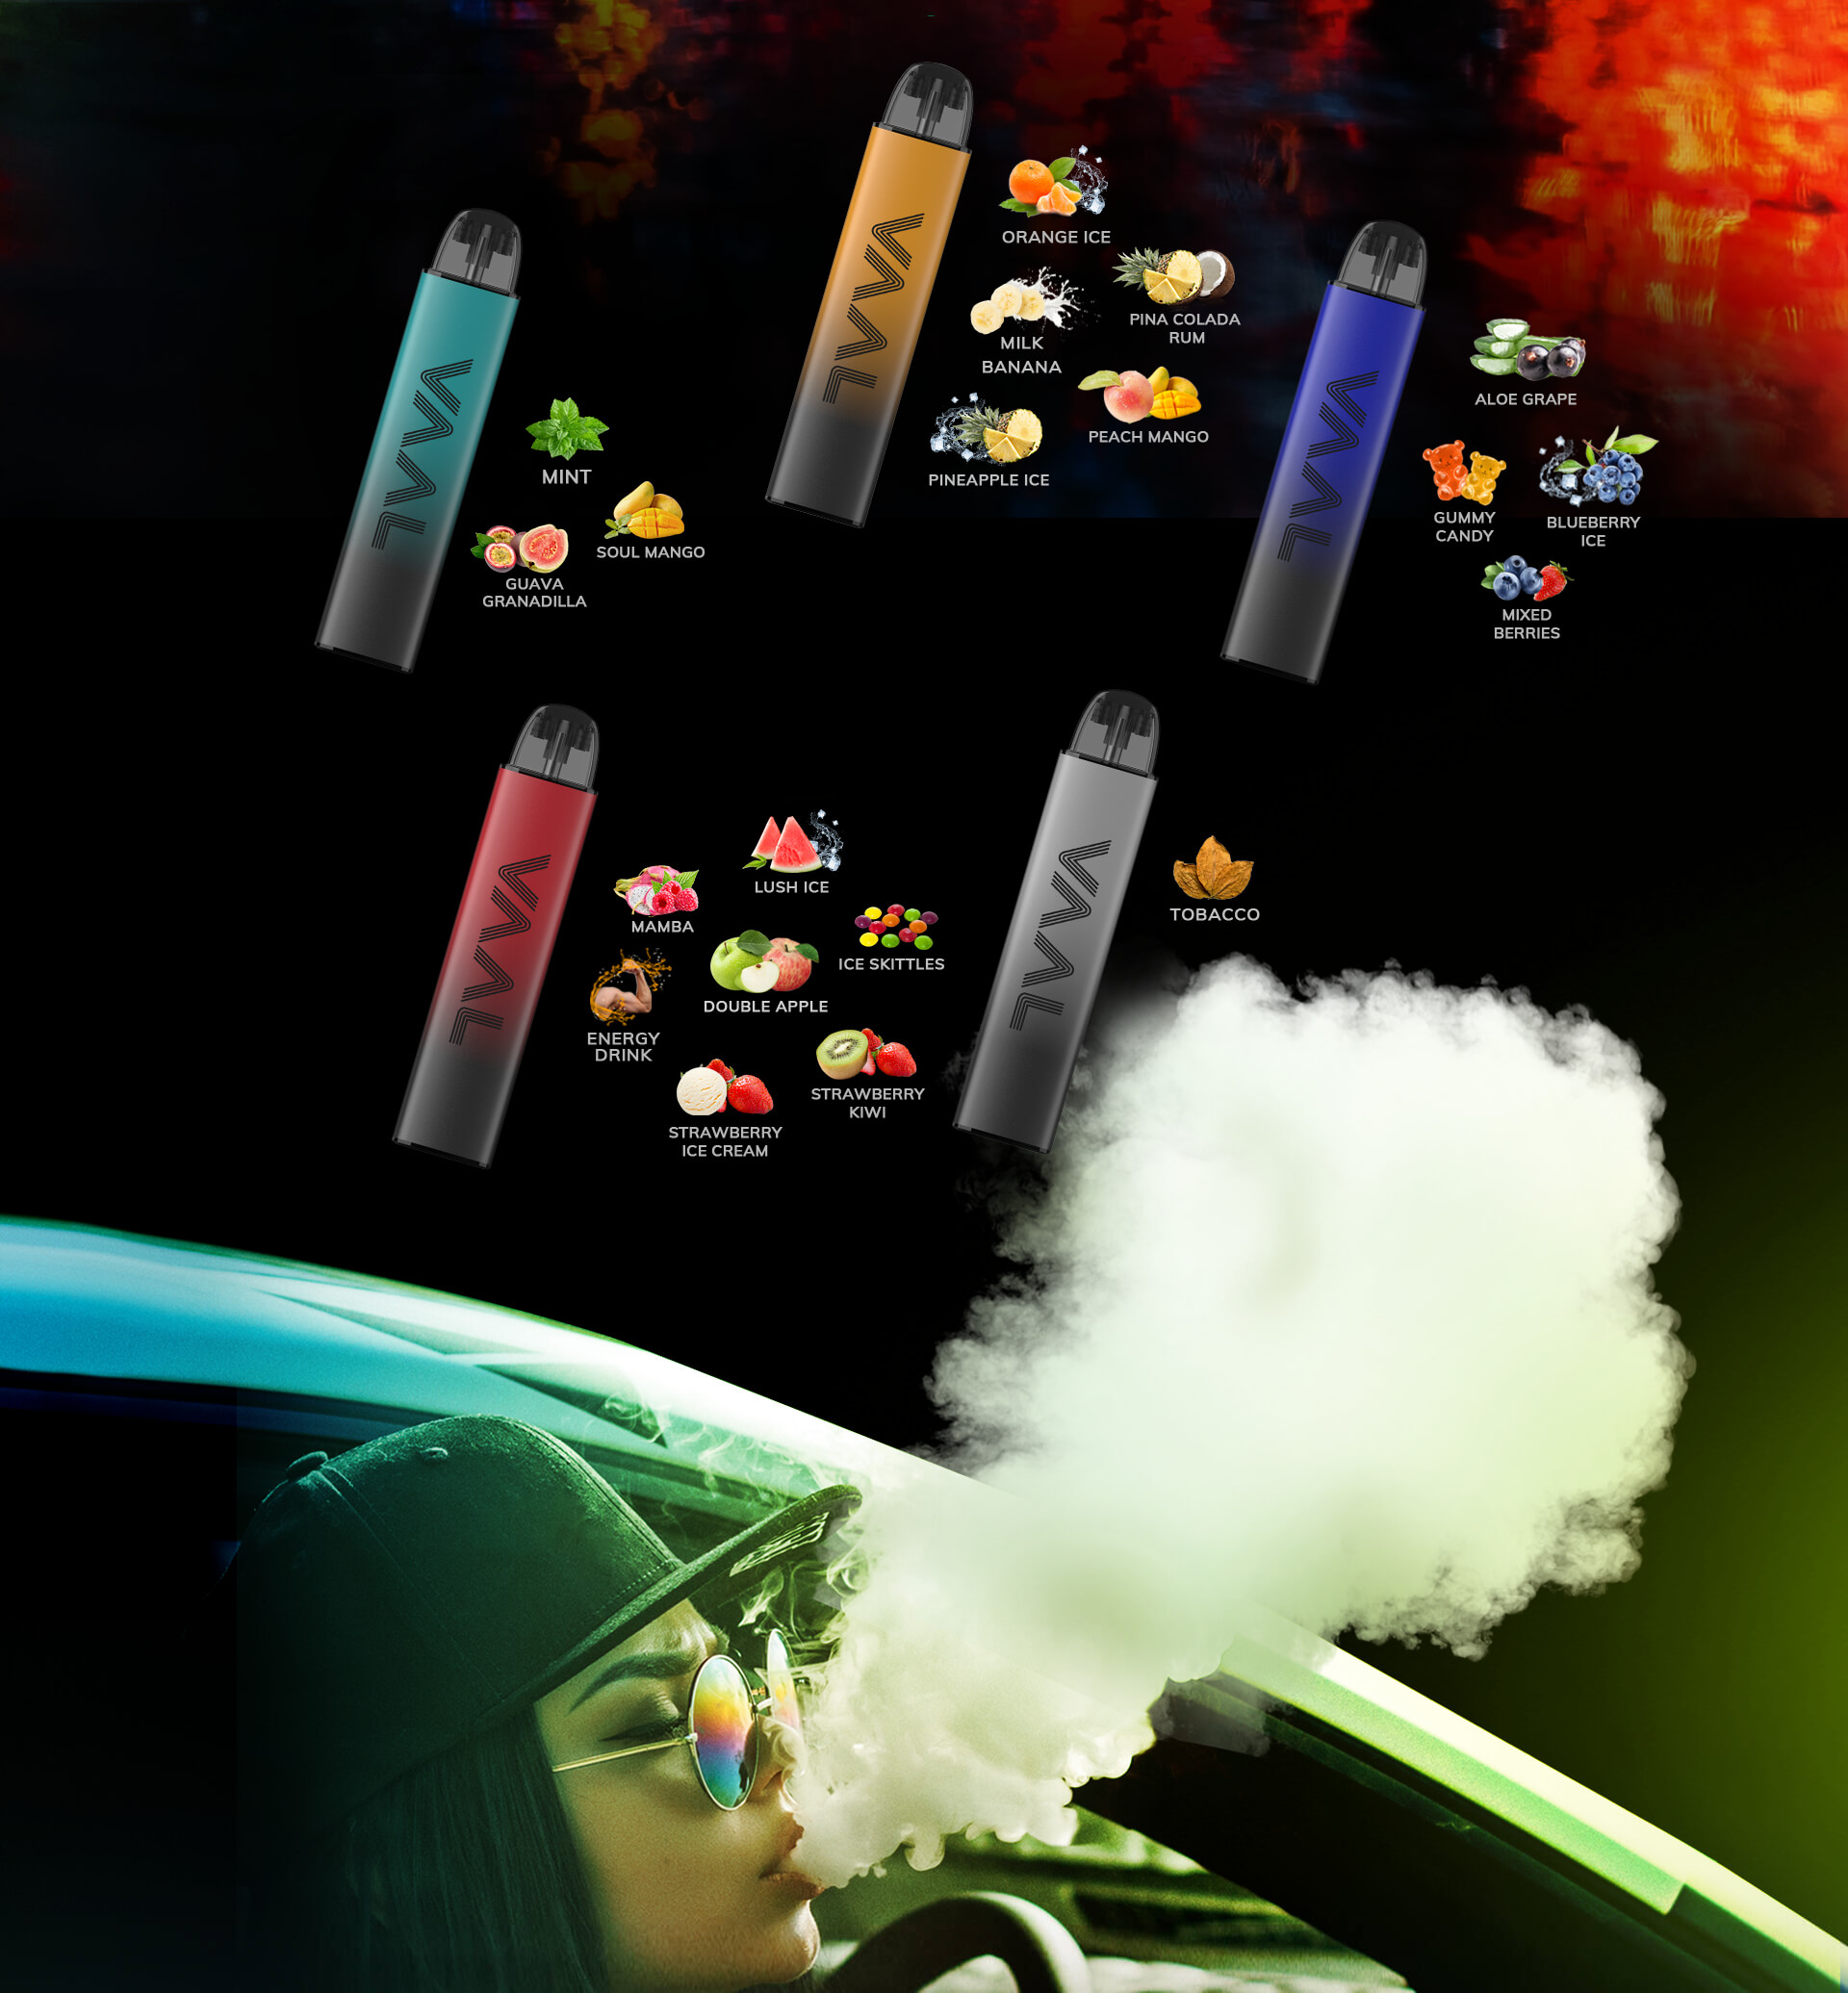 VAAL CC1700 and CC2200 both come with diverse flavors, including Soul Mango, Mint, Guava Granadilla, Orange ice, Milk Banana, Pina Colada Rum, Peach Mango, Pineapple ice, Aloe Grape, Gummy Candy, Blueberry ice, Mixed Berries, Lush ice, Manba, Double Apple, Ice skittles, Energy Drink, Strawberry ice cream, Strawberry Kiwi and Tobacco.